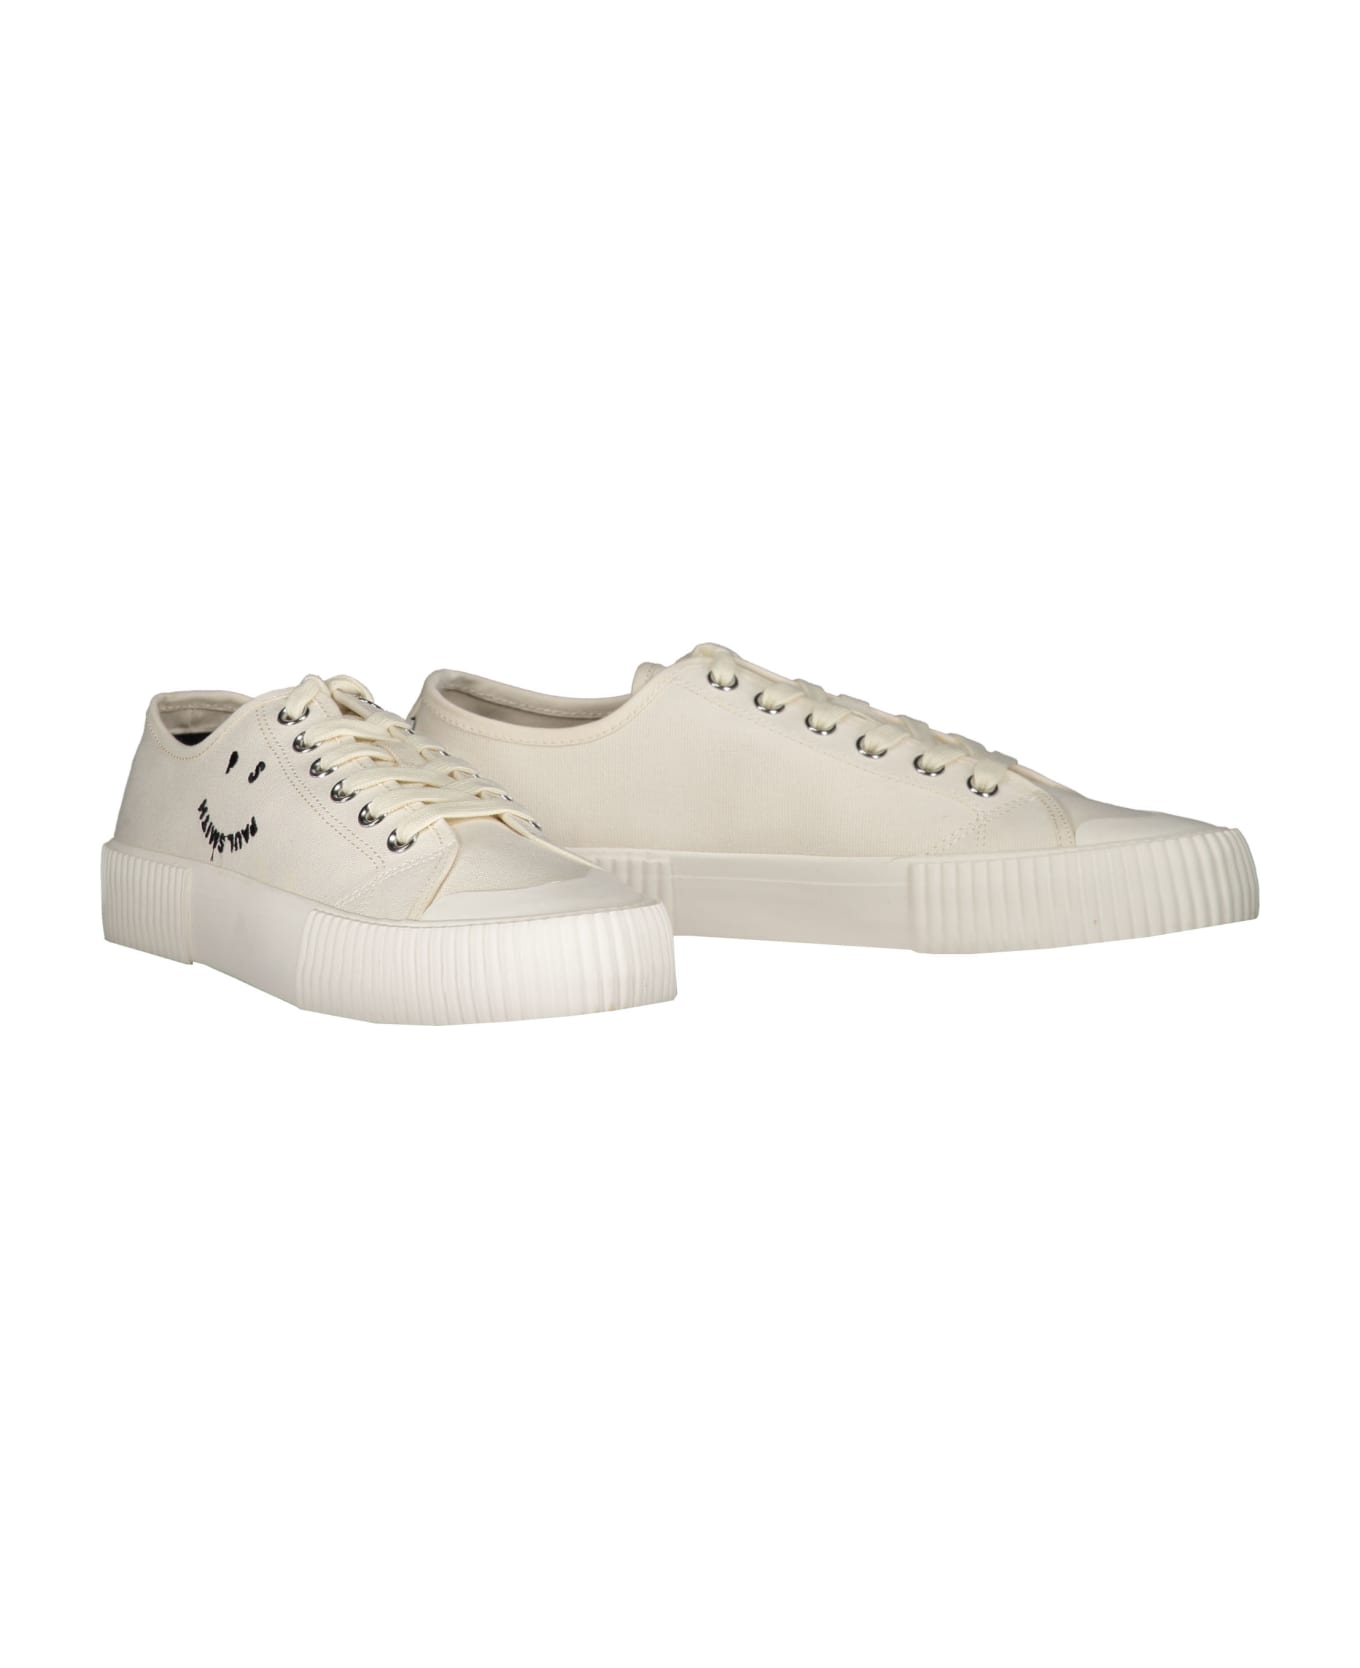 Paul Smith Canvas Low-top Sneakers - White スニーカー